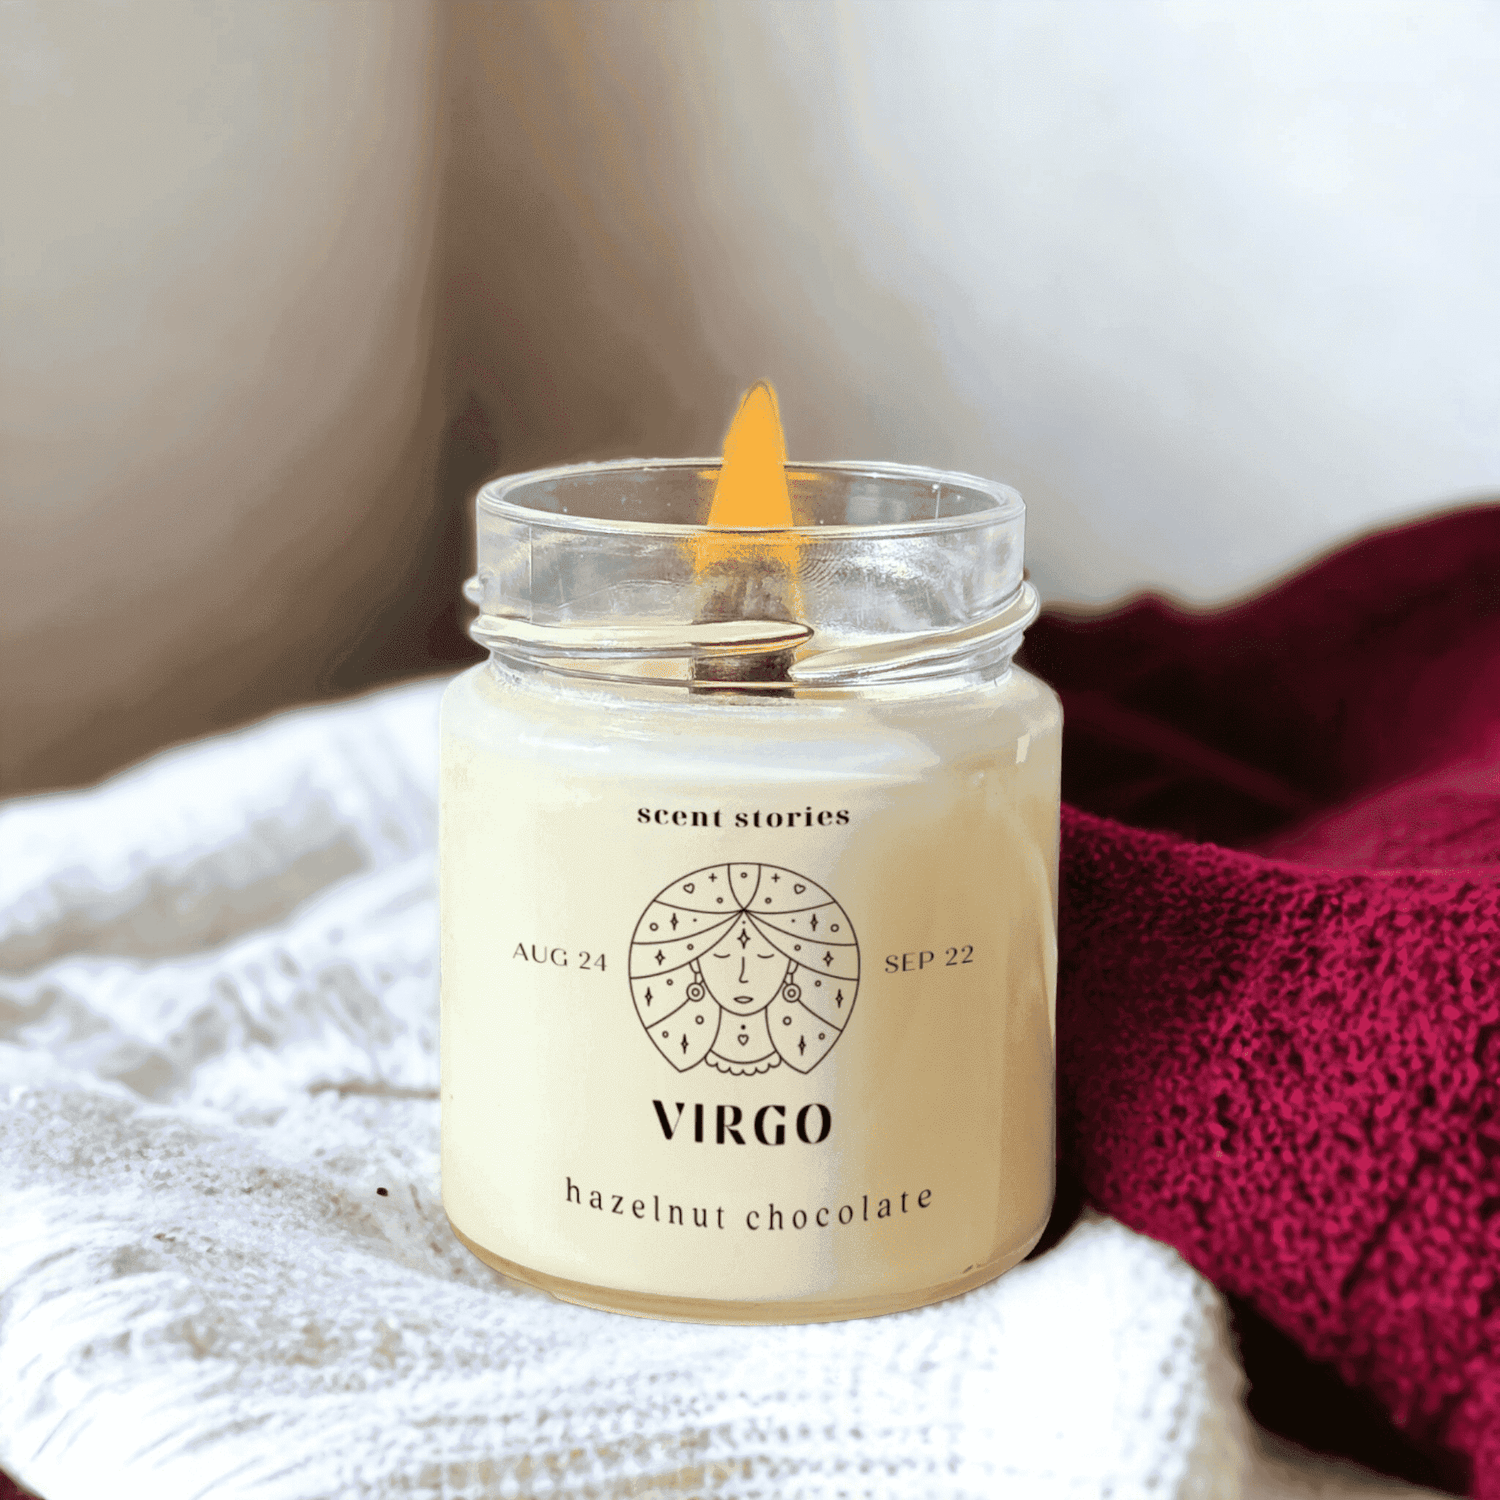 Zodiac Signs Candle - Scent Stories